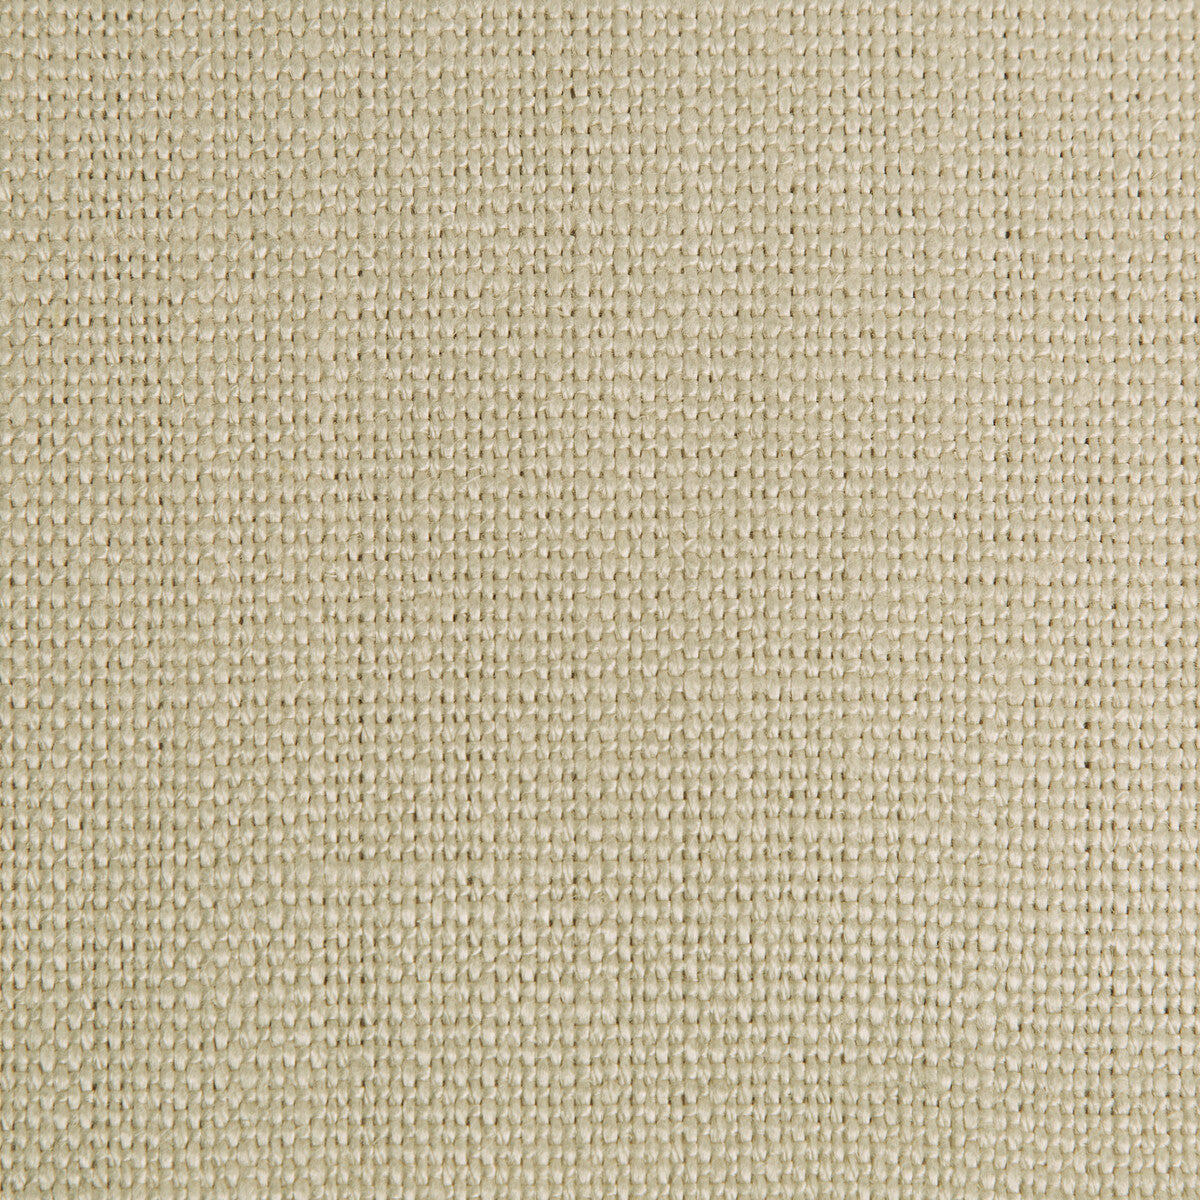 Stone Harbor fabric in marshmallow color - pattern 27591.1606.0 - by Kravet Basics in the The Complete Linen IV collection